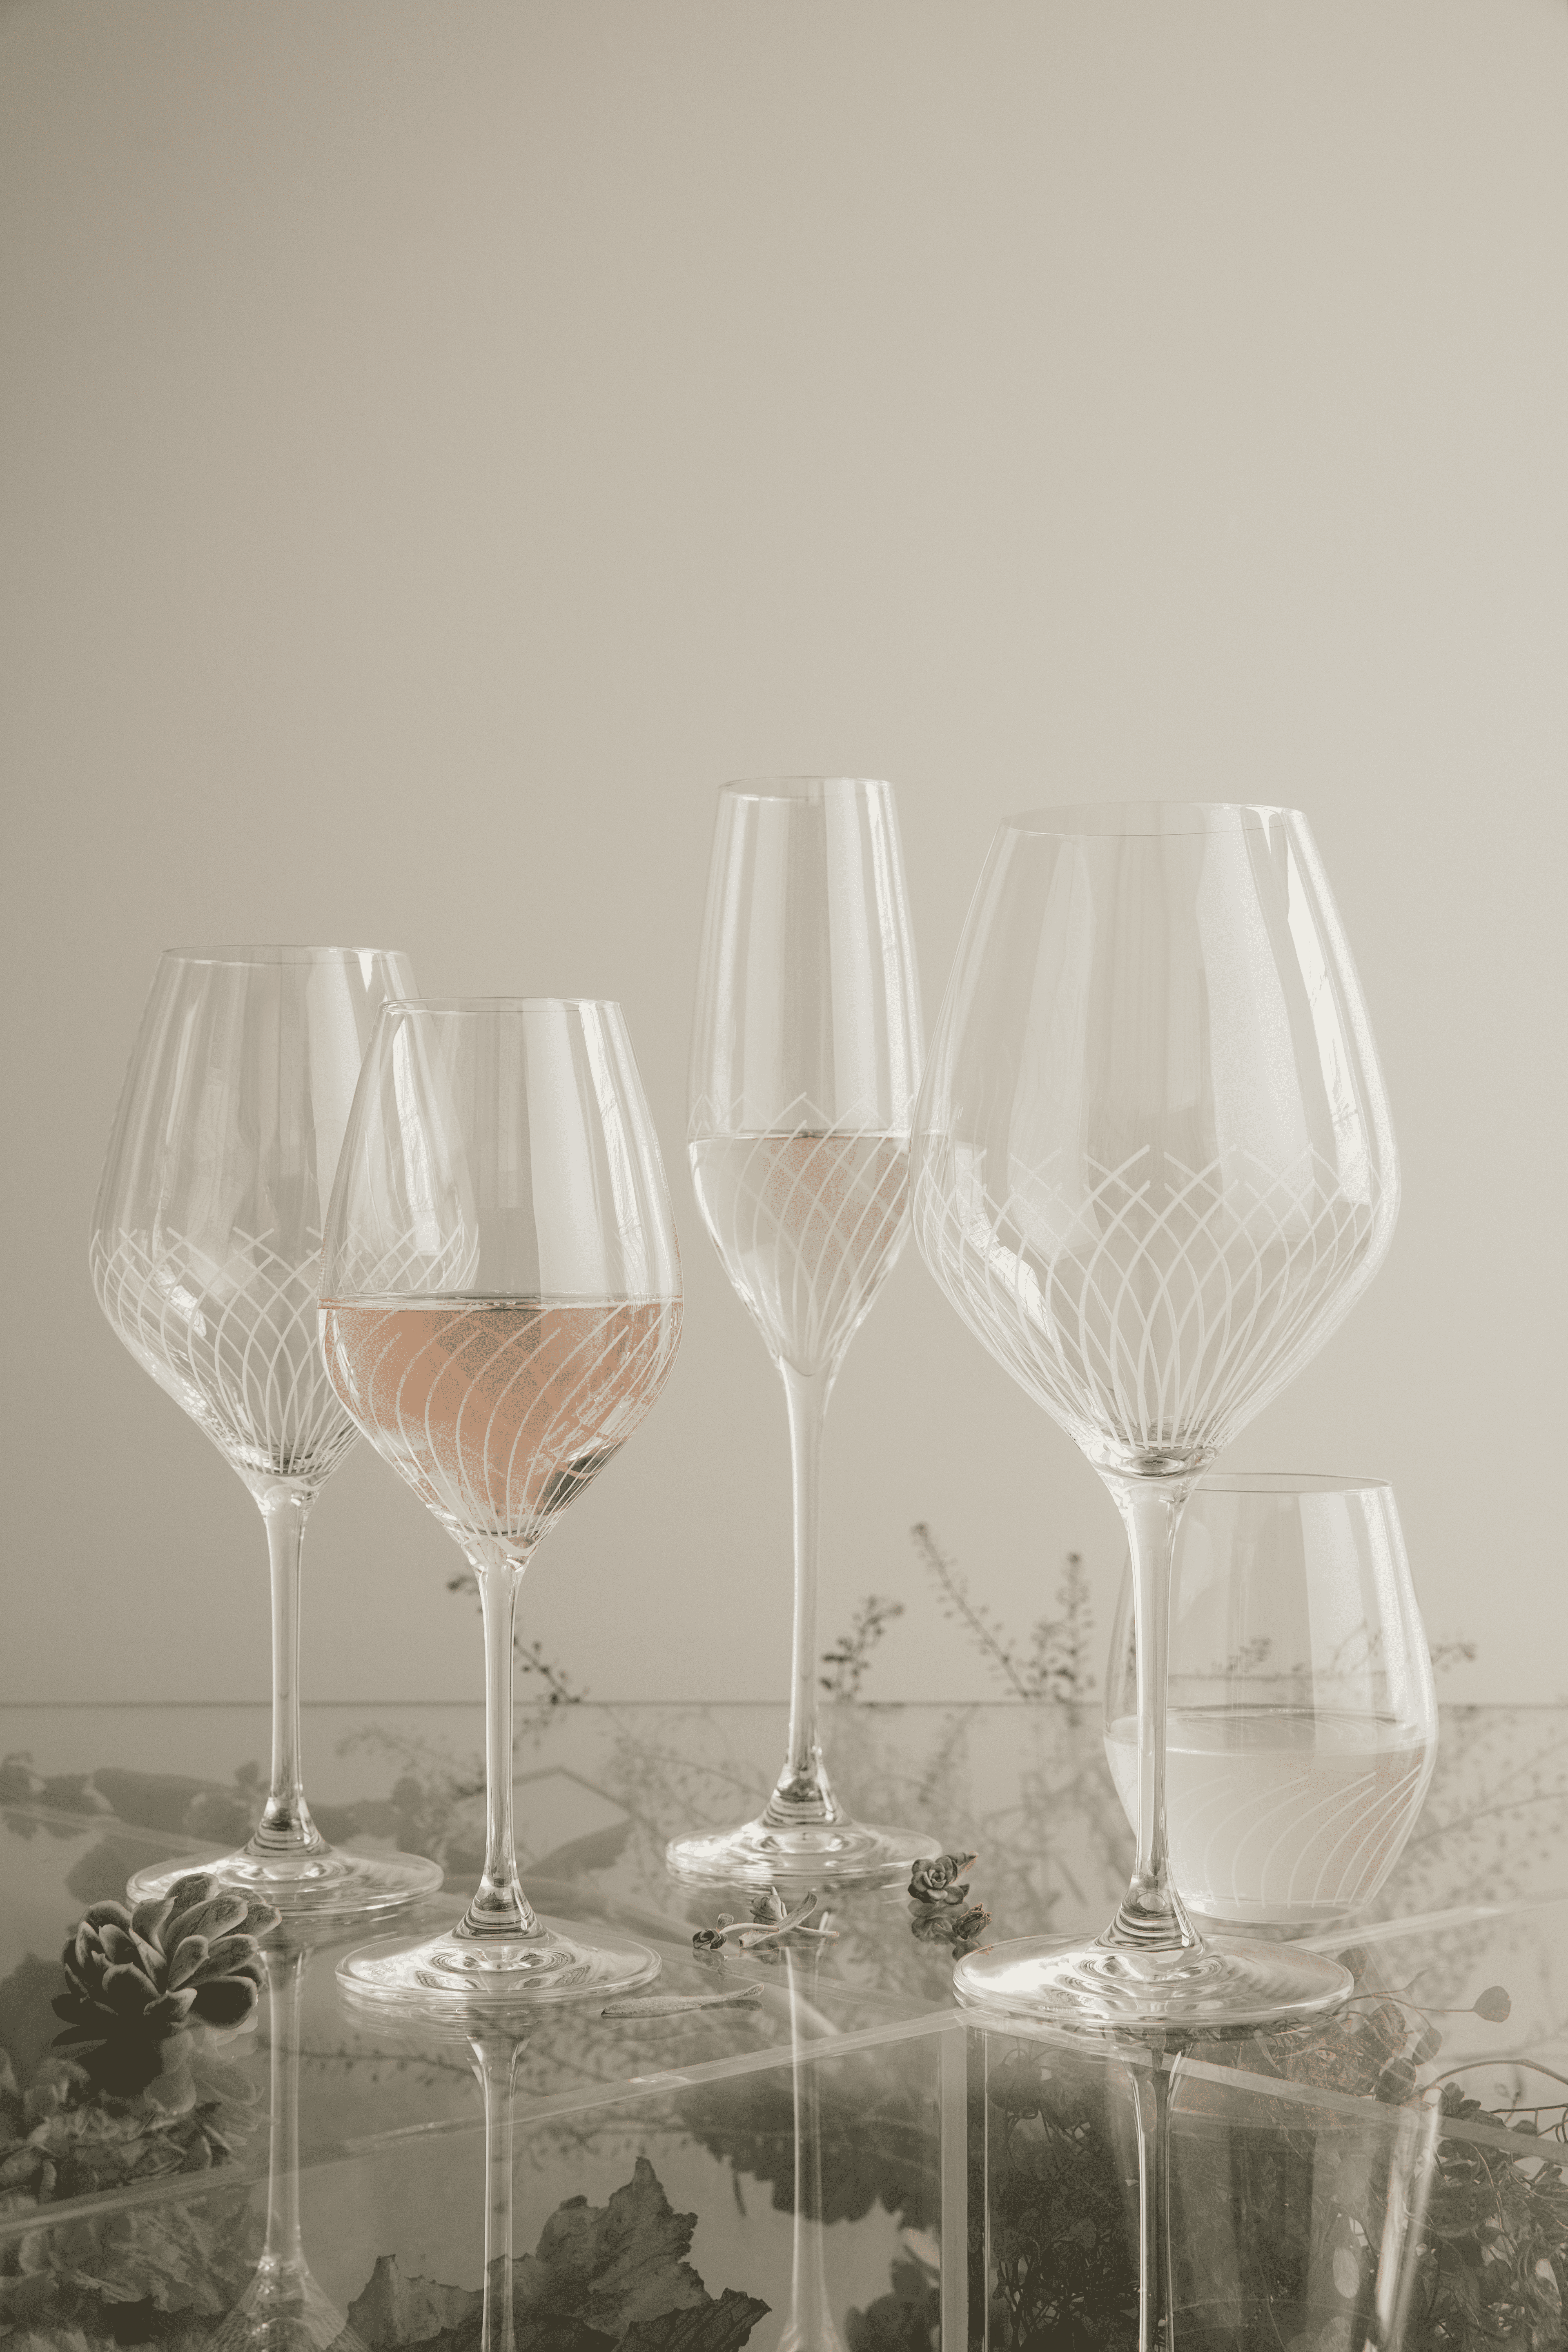 Red Wine Glass 52 cl 2 pcs.